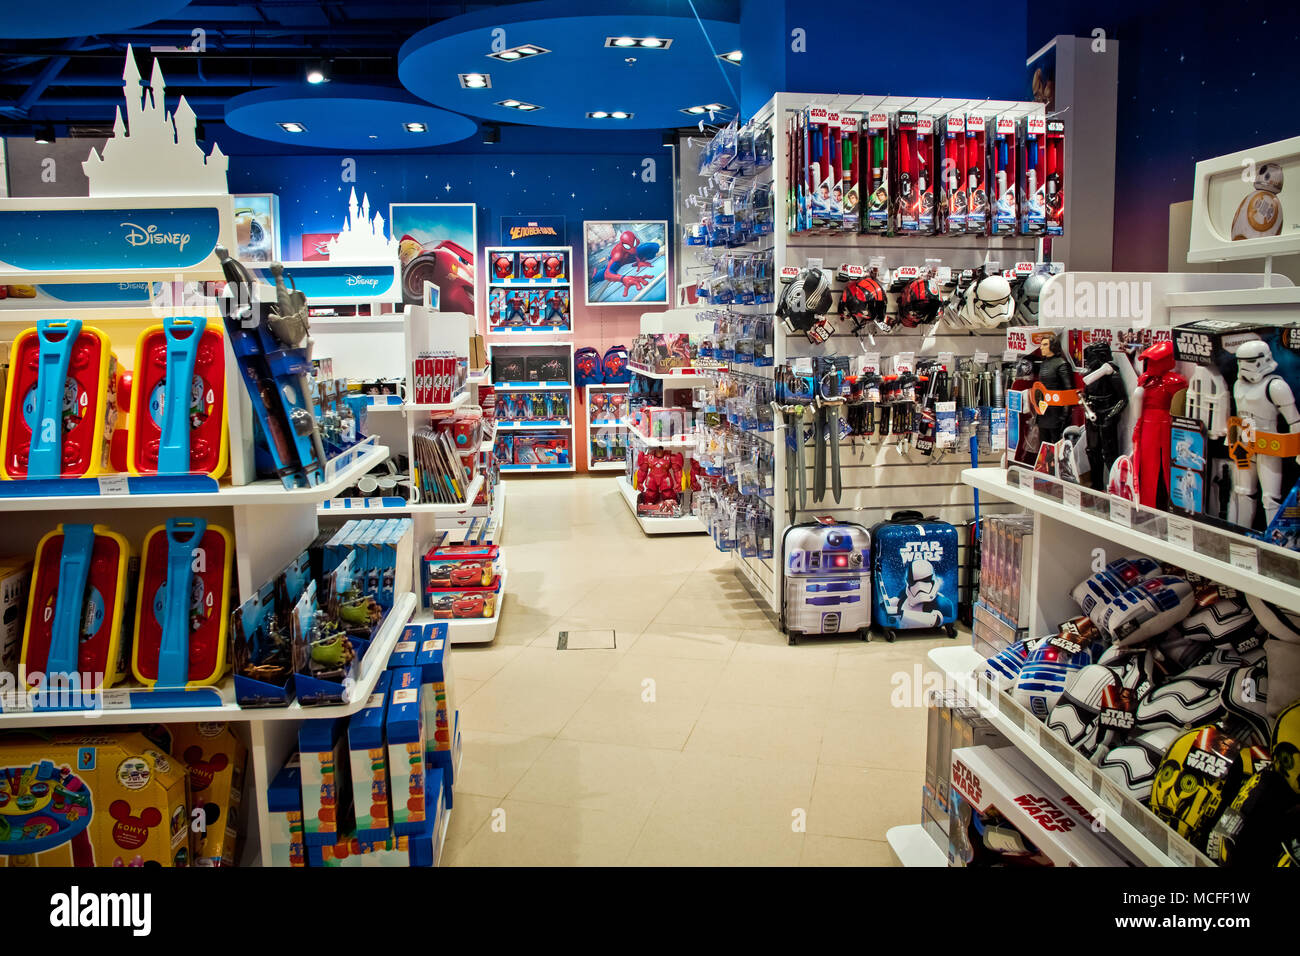 Disney store interor. The Walt Disney Company, commonly known as Disney, is  an American mass media and entertainment company Stock Photo - Alamy